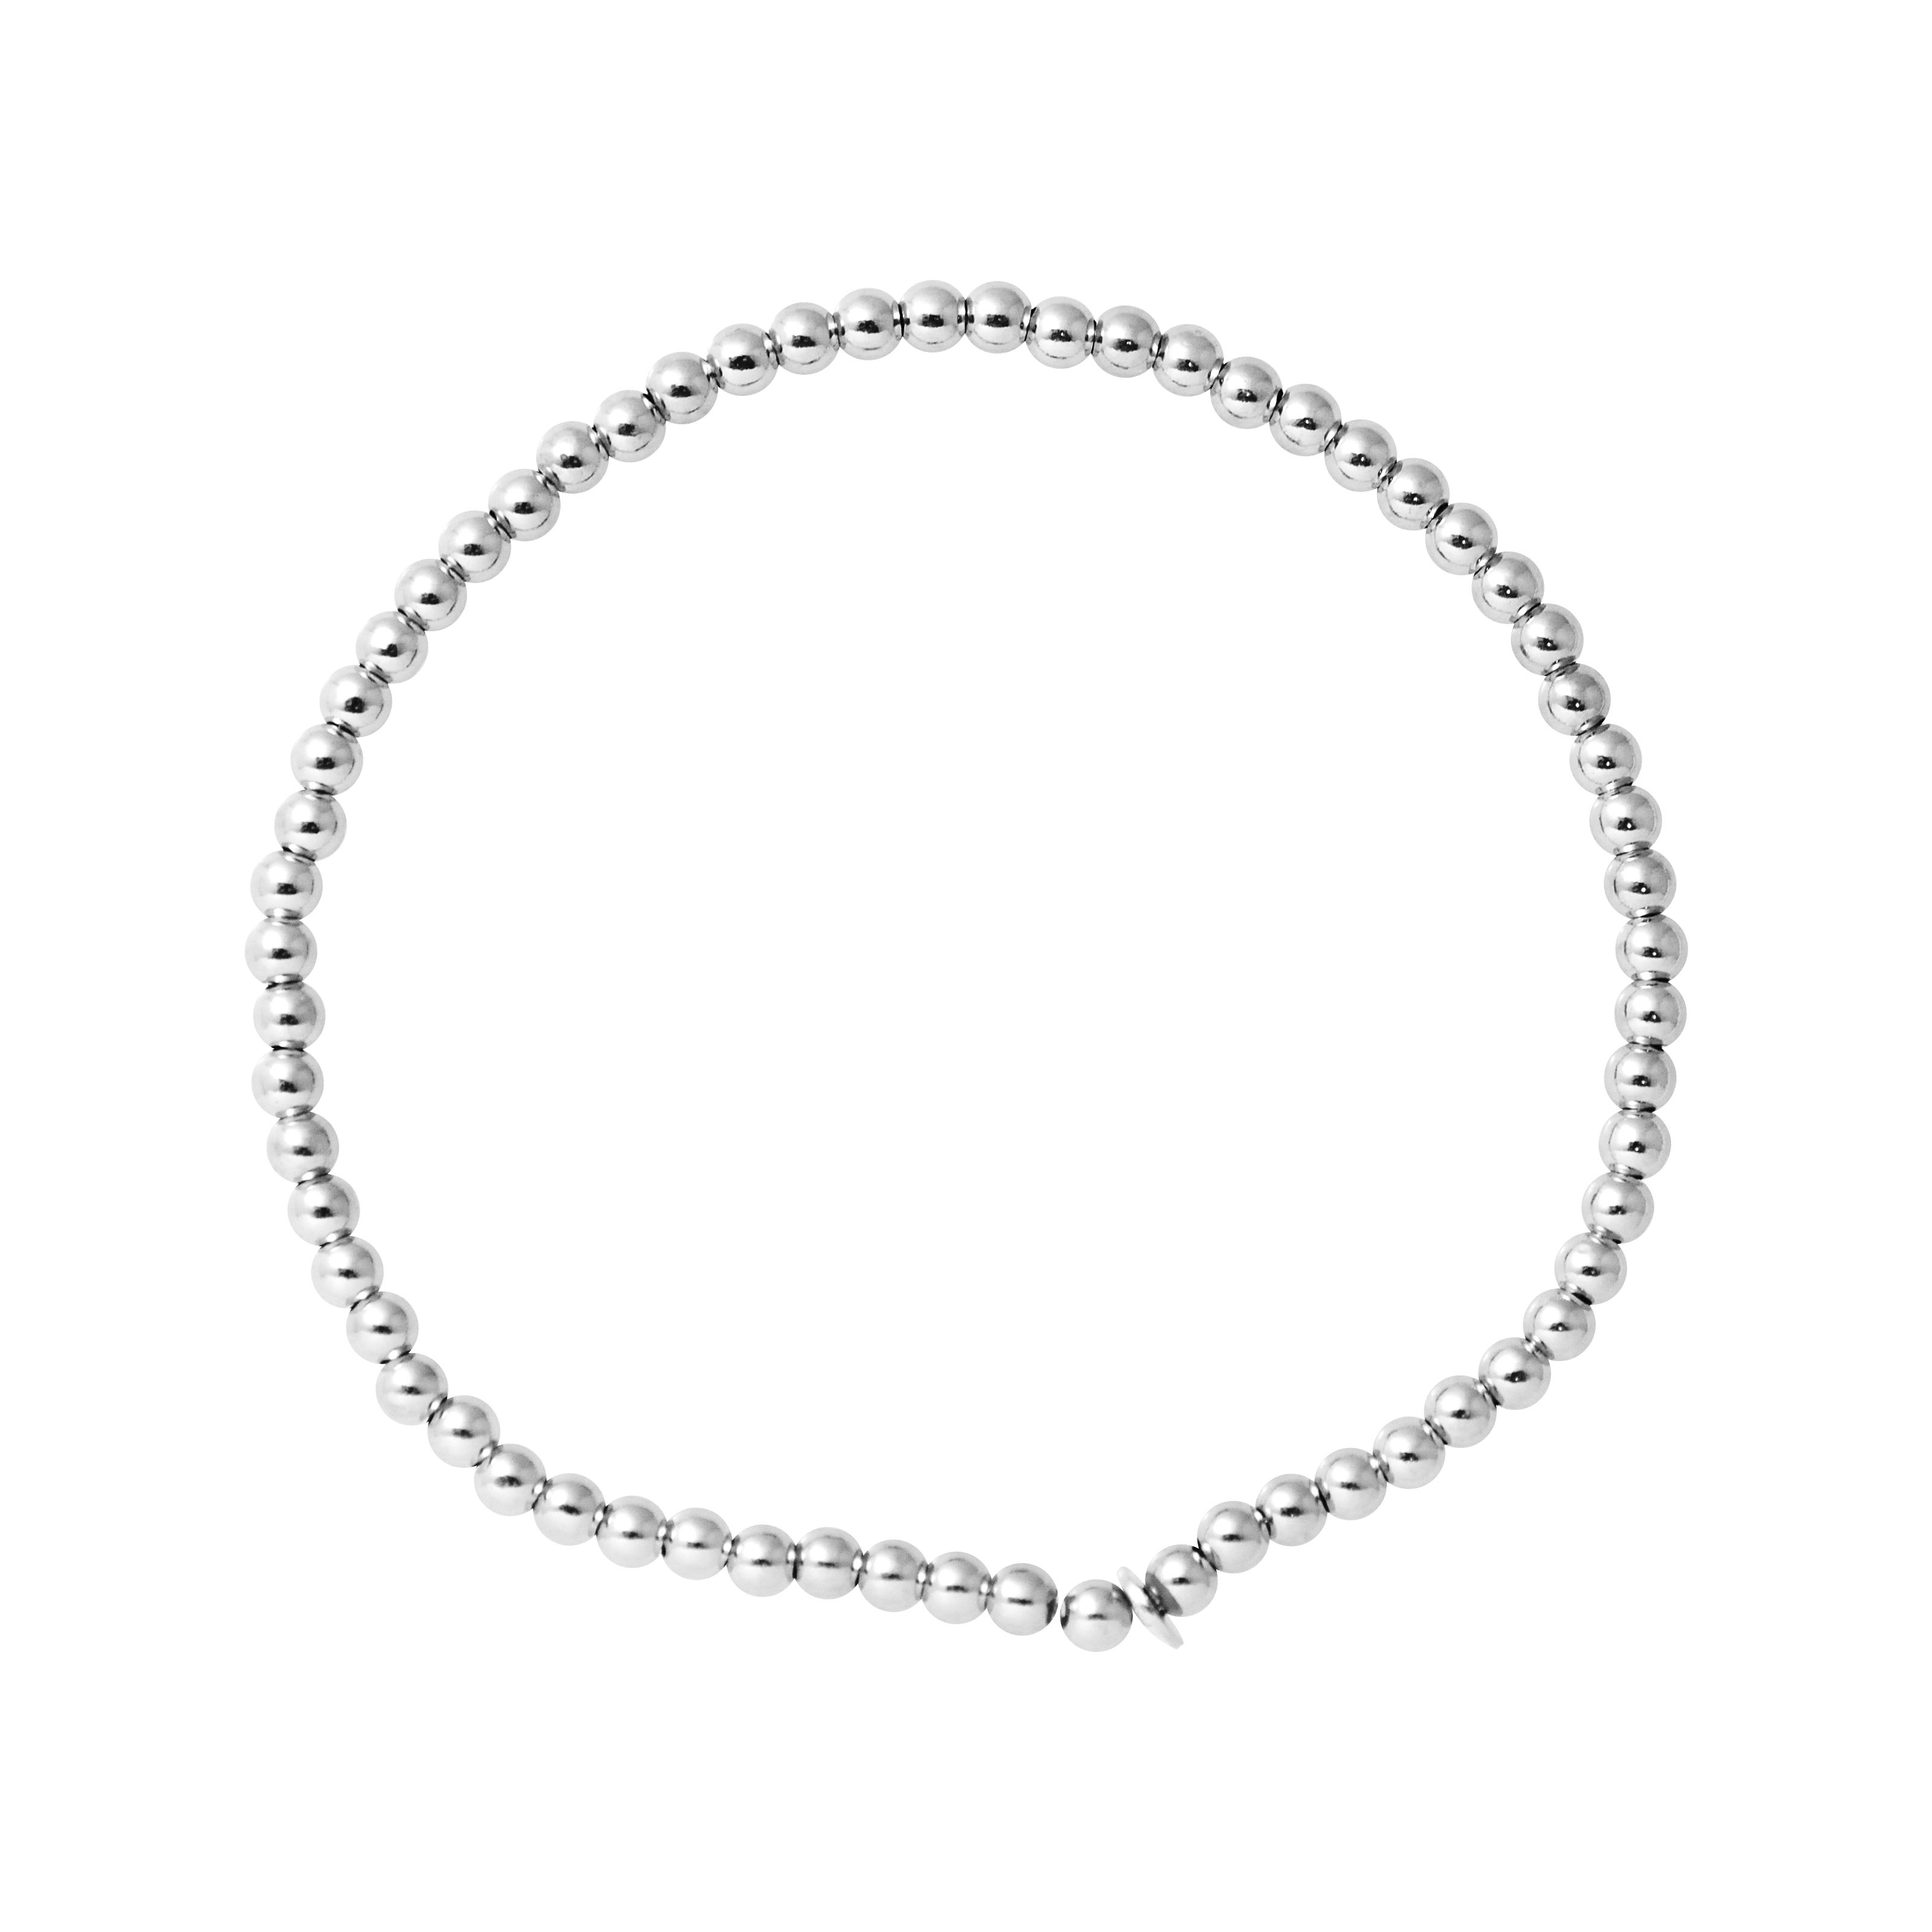 Elasticated Bracelet - Silver Balls 3 mm Diameter - Suitable for wrist 5,5 to 8in,14 to 20 cm in diameter - Silver 925 thousandths Rhodium Plated - Our jewellery is made in France and will be delivered in a gift box accompanied by a Certificate of Authenticity and International Warranty